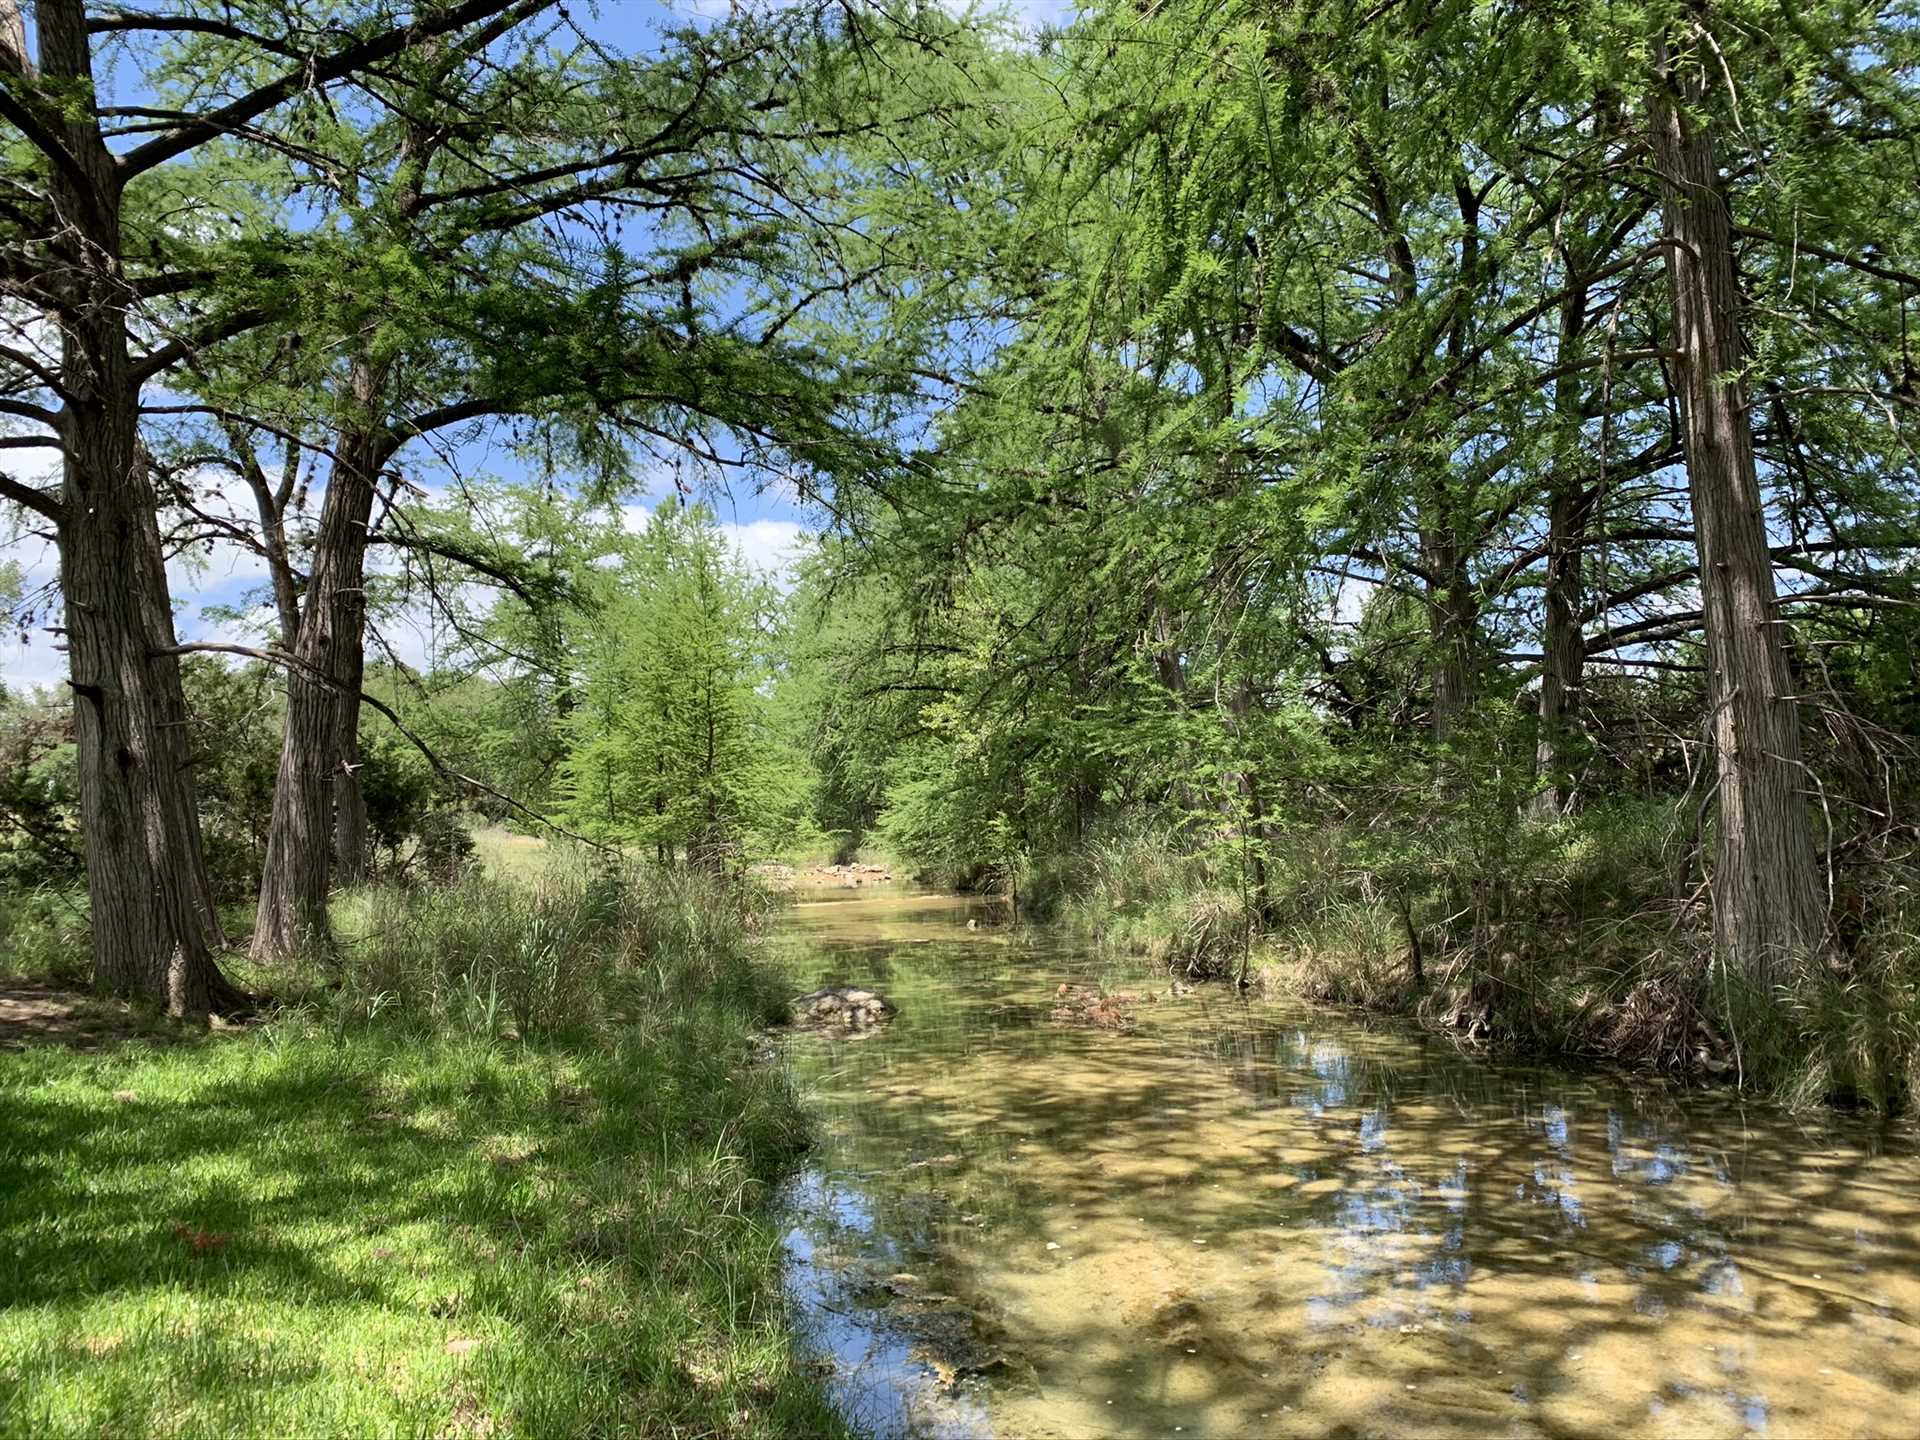                                                 The quiet country setting is ideal for wildlife and bird watching-or just kicking back and enjoying the beauty of the Hill Country.